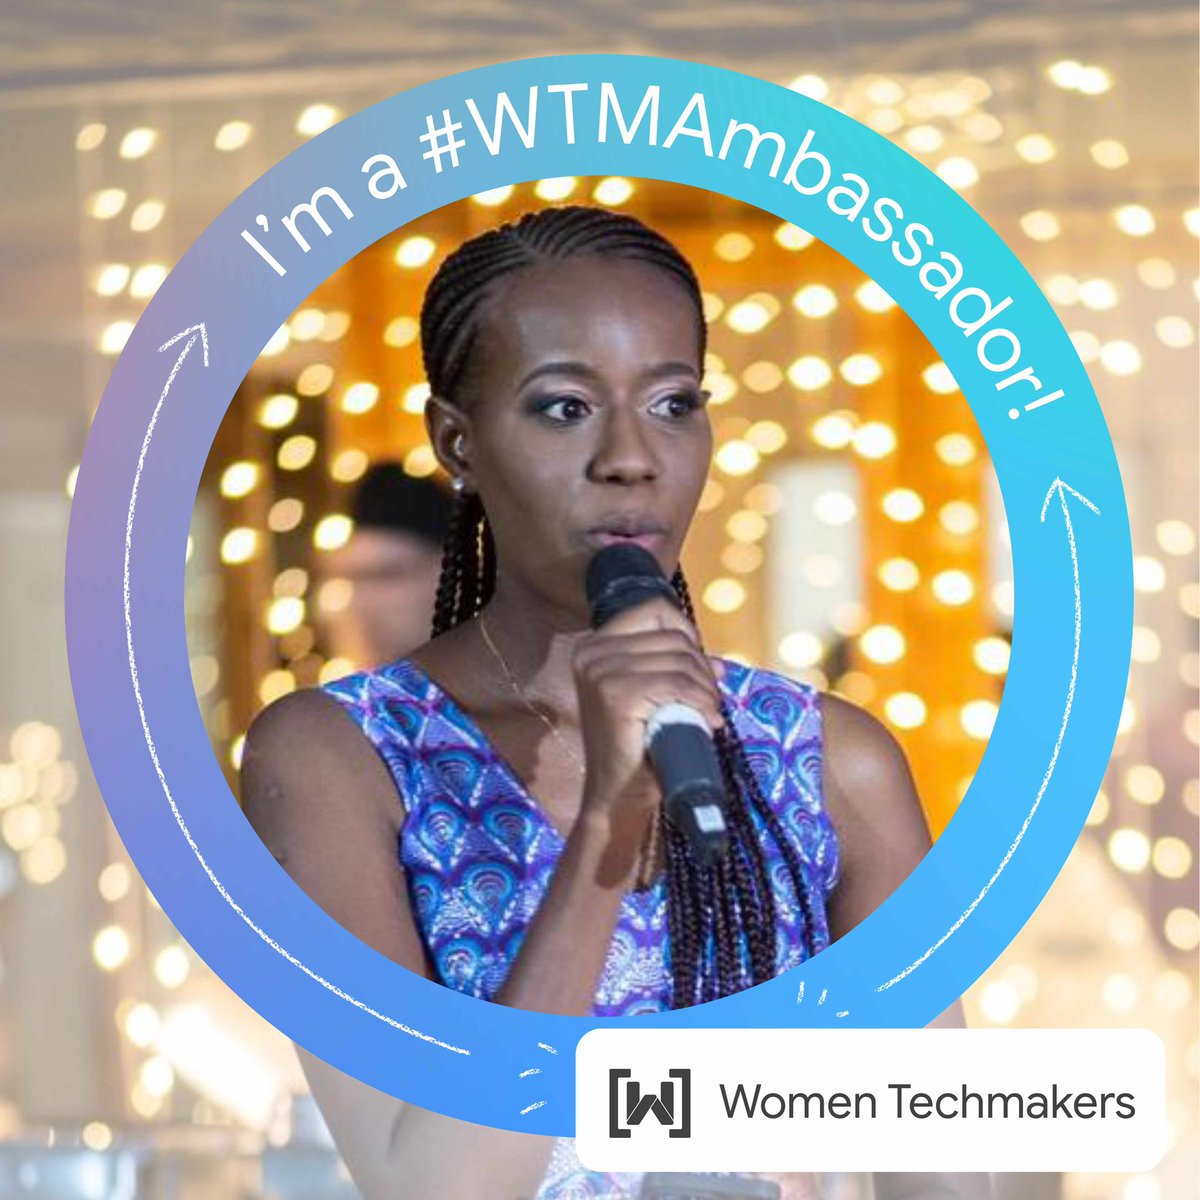 I’m thrilled to have been selected as the #WTMAmbassador. Thank you @WomenTechmakers for this wonderful opportunity. I’m looking forward to making a positive impact in my community and beyond with this new role 💫🙏🏾❤️